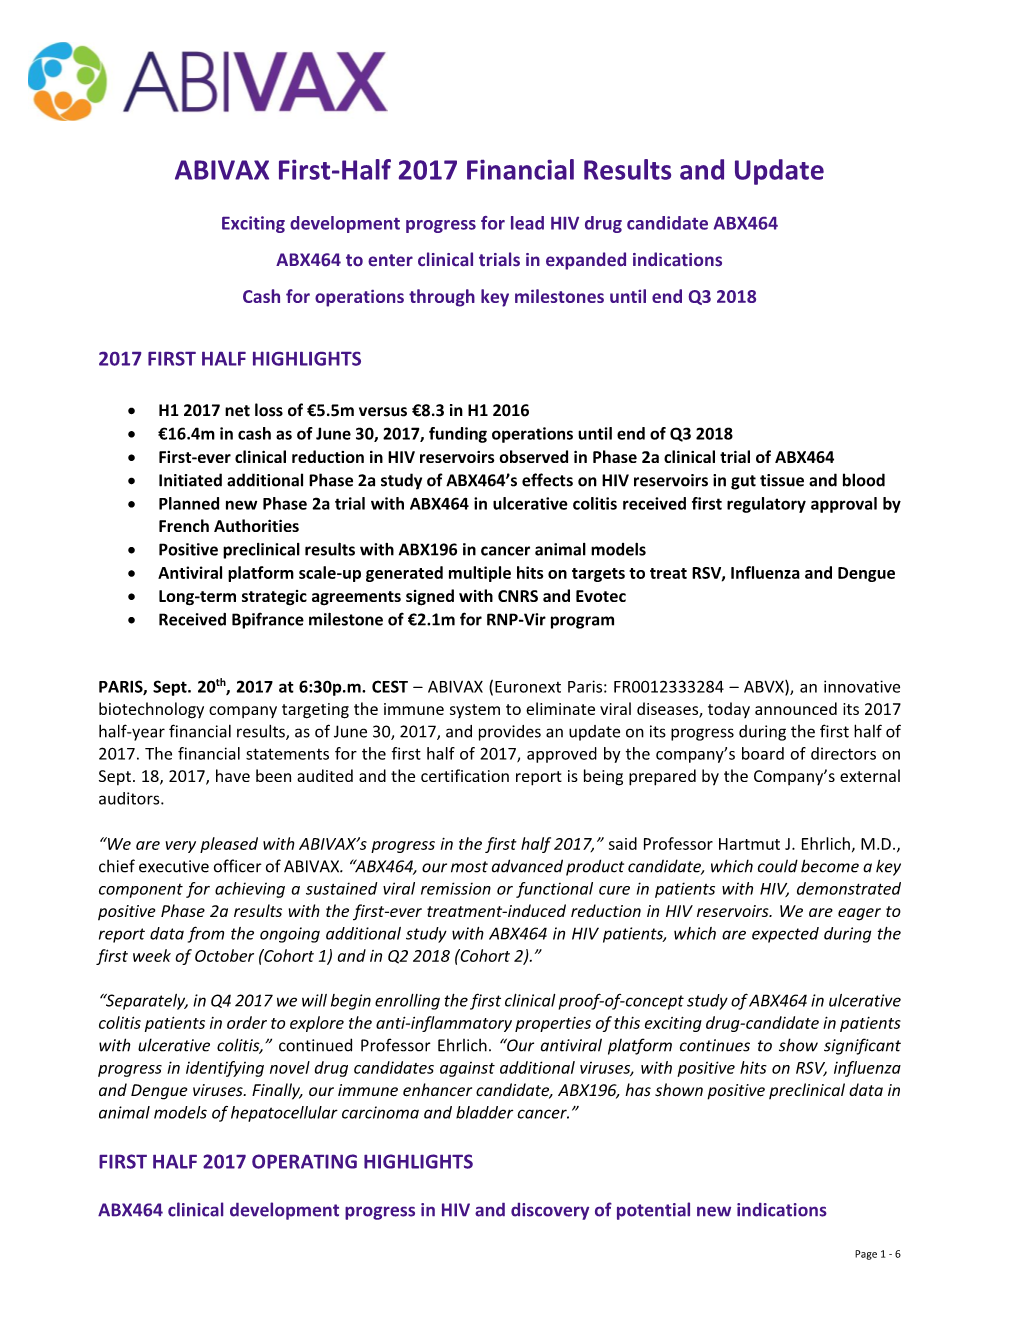 ABIVAX First-Half 2017 Financial Results and Update